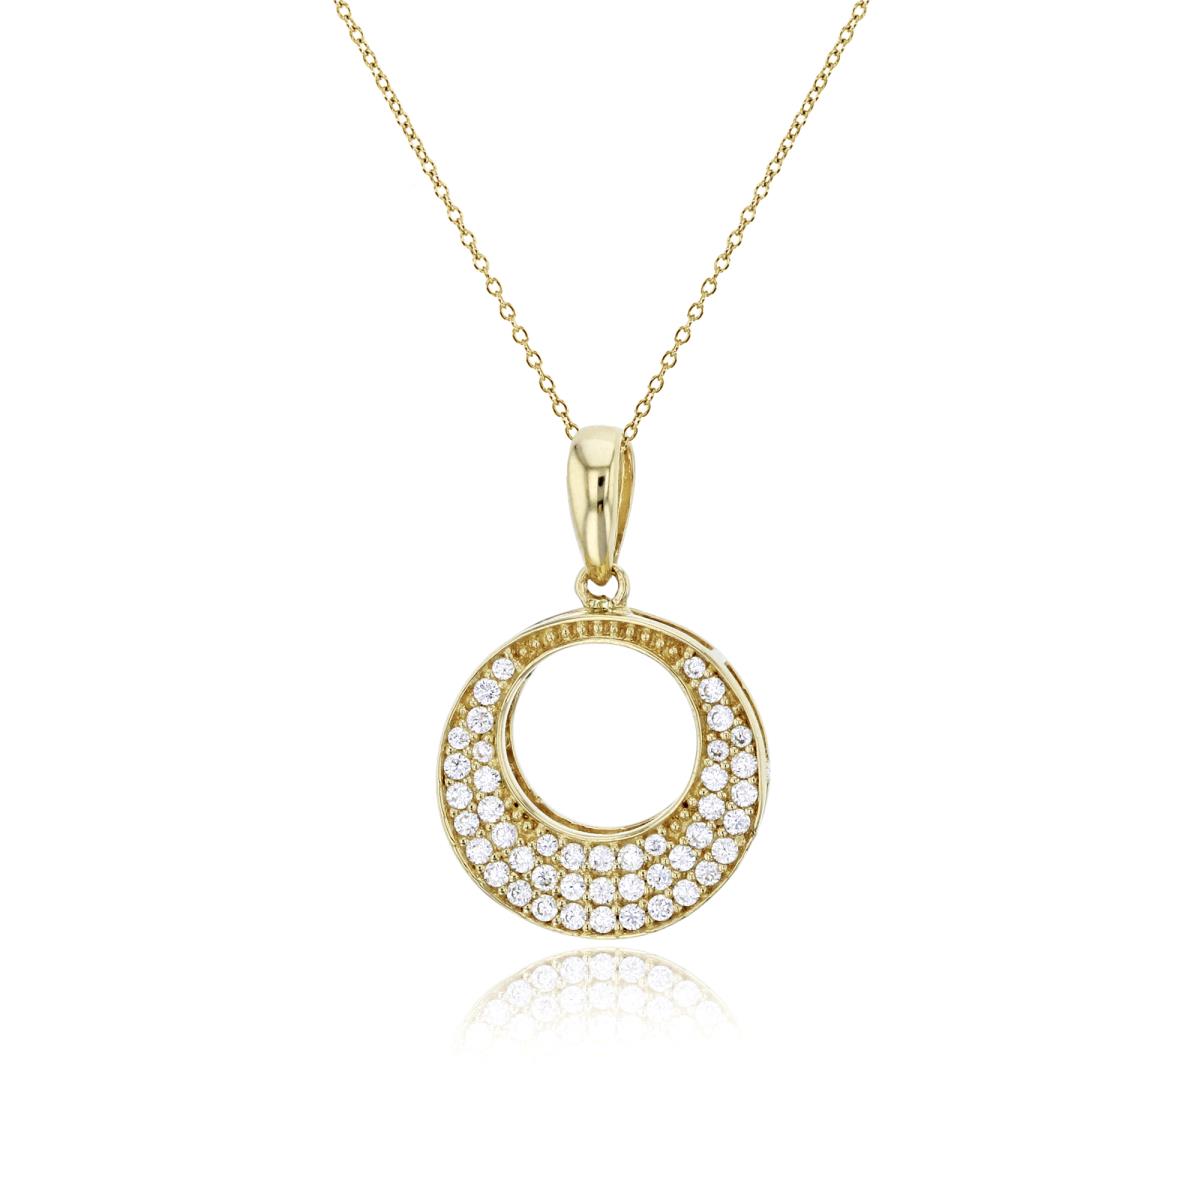 10K Yellow Gold Micropave CZ Open Circle Filigree 18" Necklace